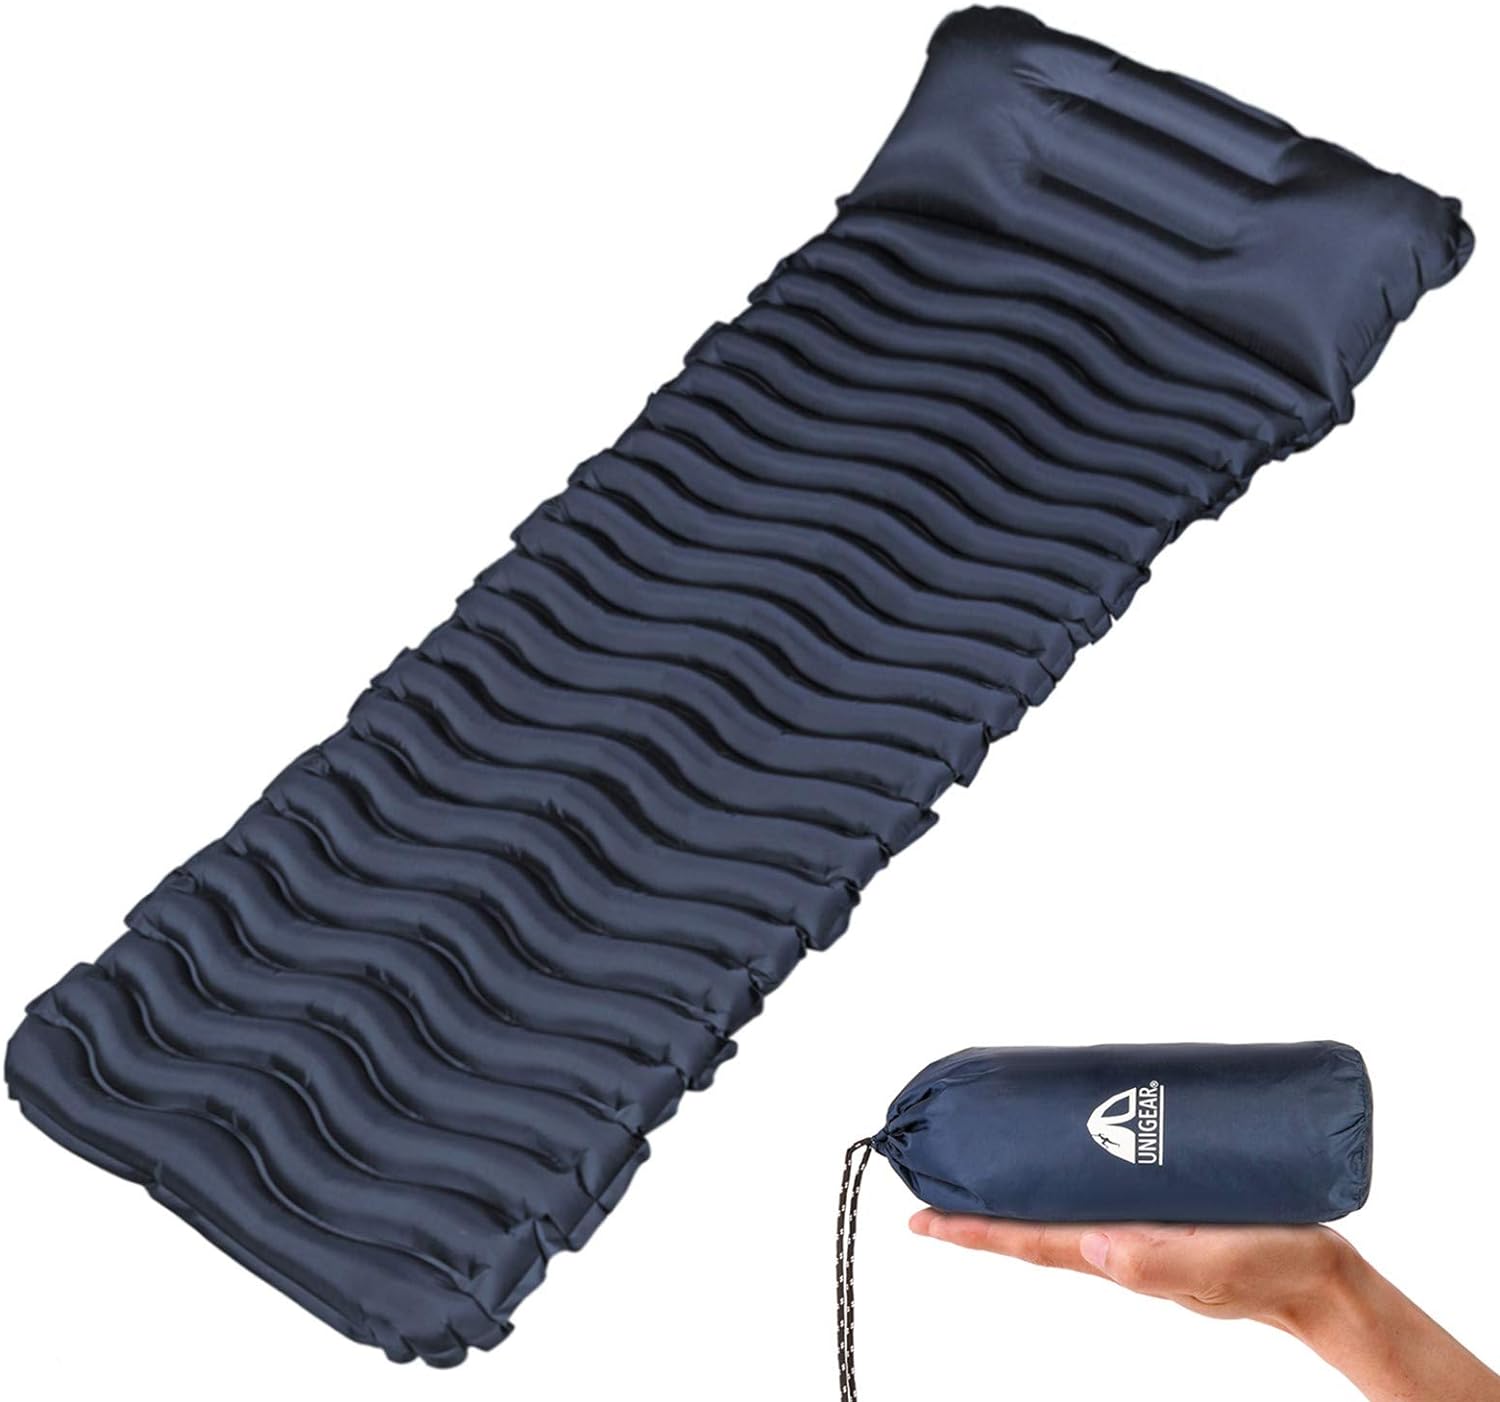 Unigear Ultralight Inflatable Sleeping Pad, Compact Air Camping Mat,Lightweight Camping Mattress for Backpacking, Hiking and Traveling